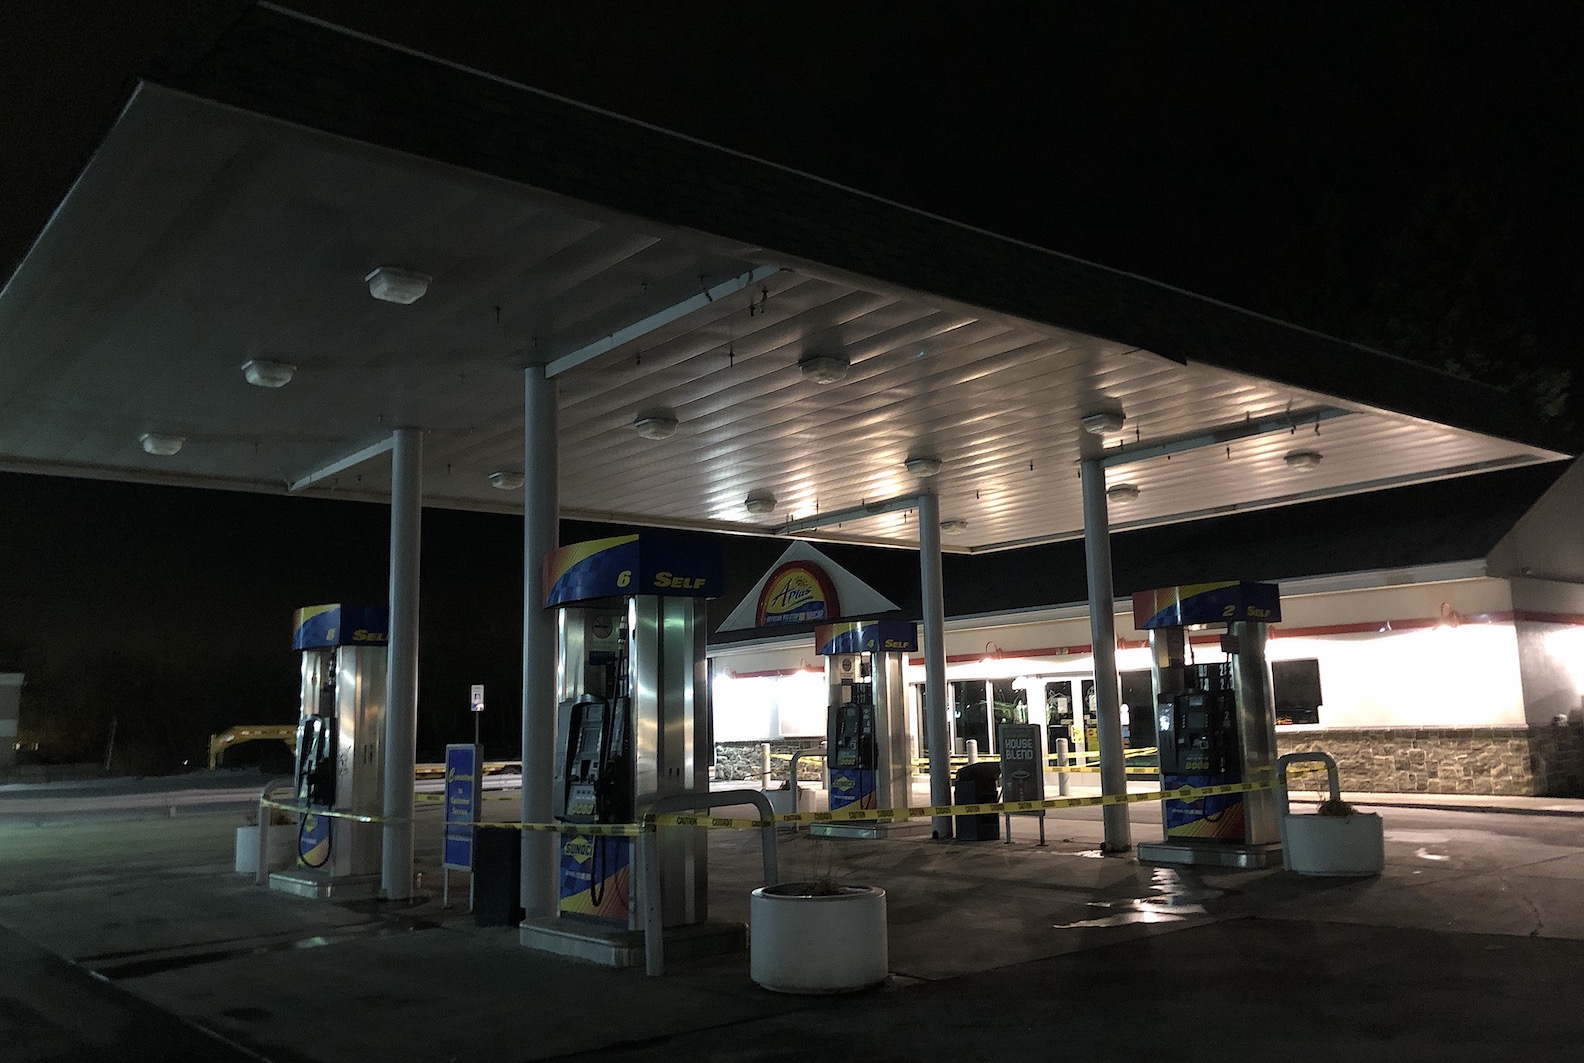 It was dark at the Sunoco/APlus on Thursday night, as the store was empty and the pumps were unavailable to the public.